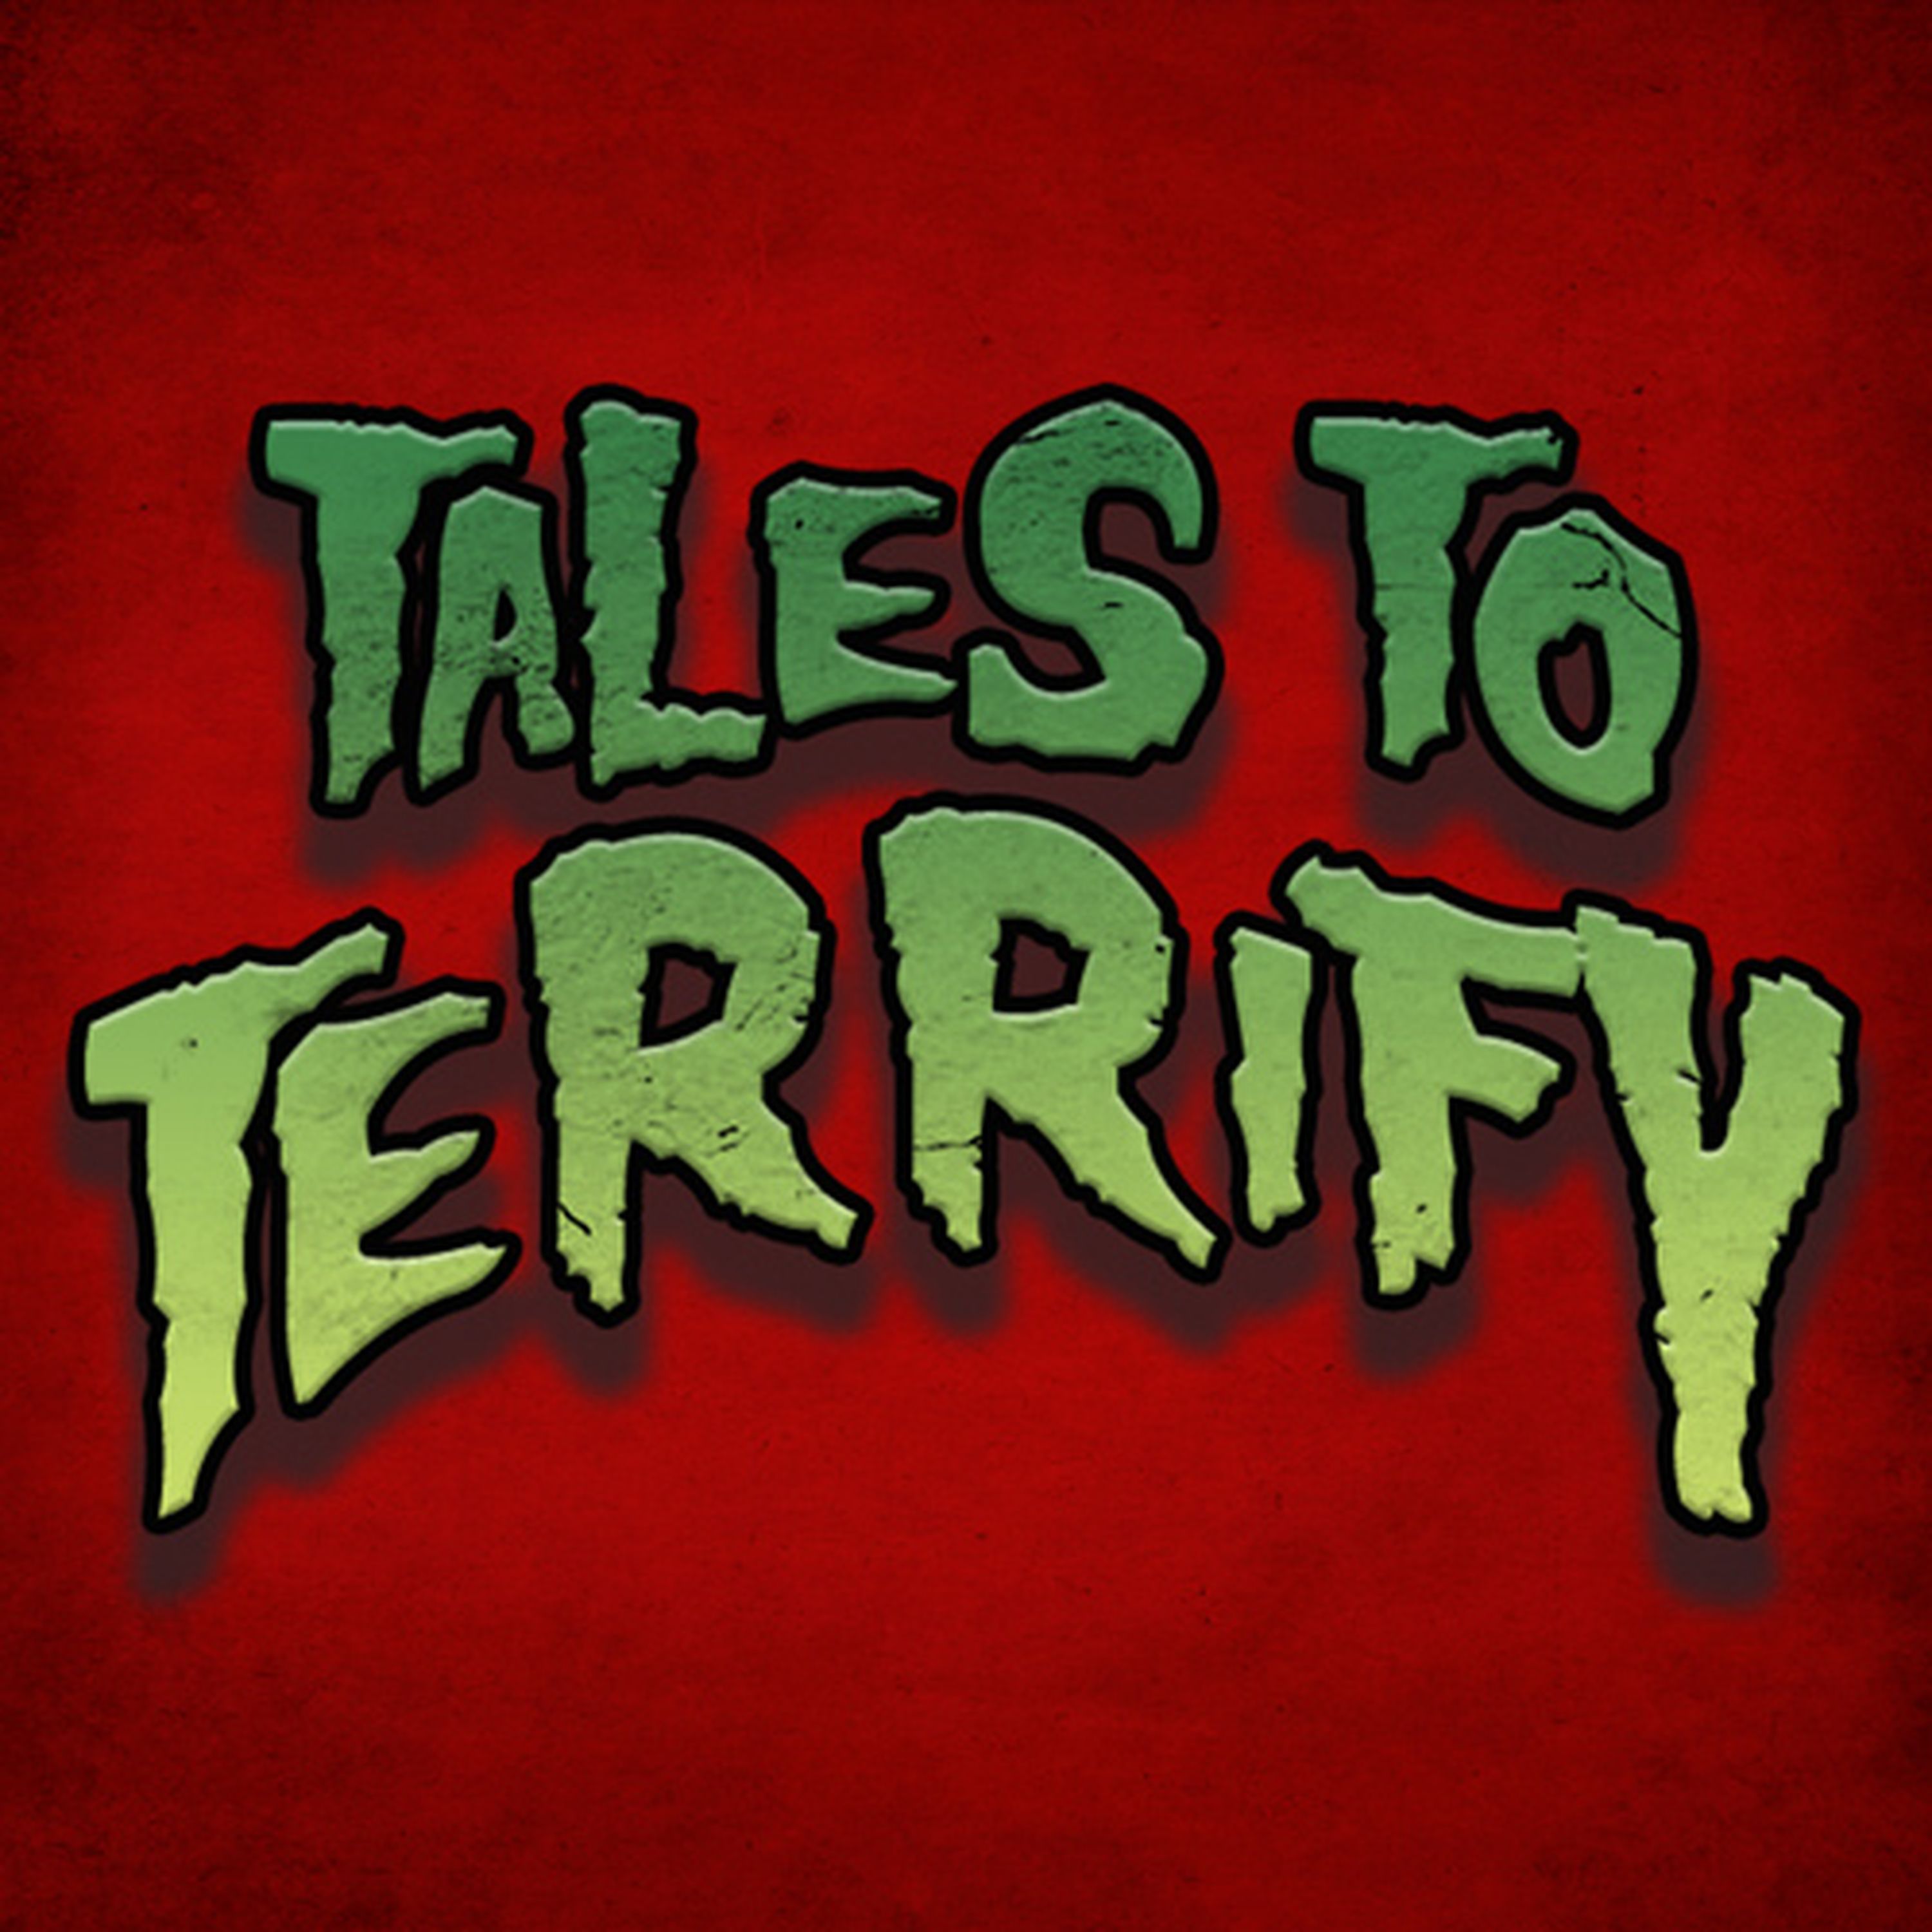 Tales to Terrify 279 Michael Bailey